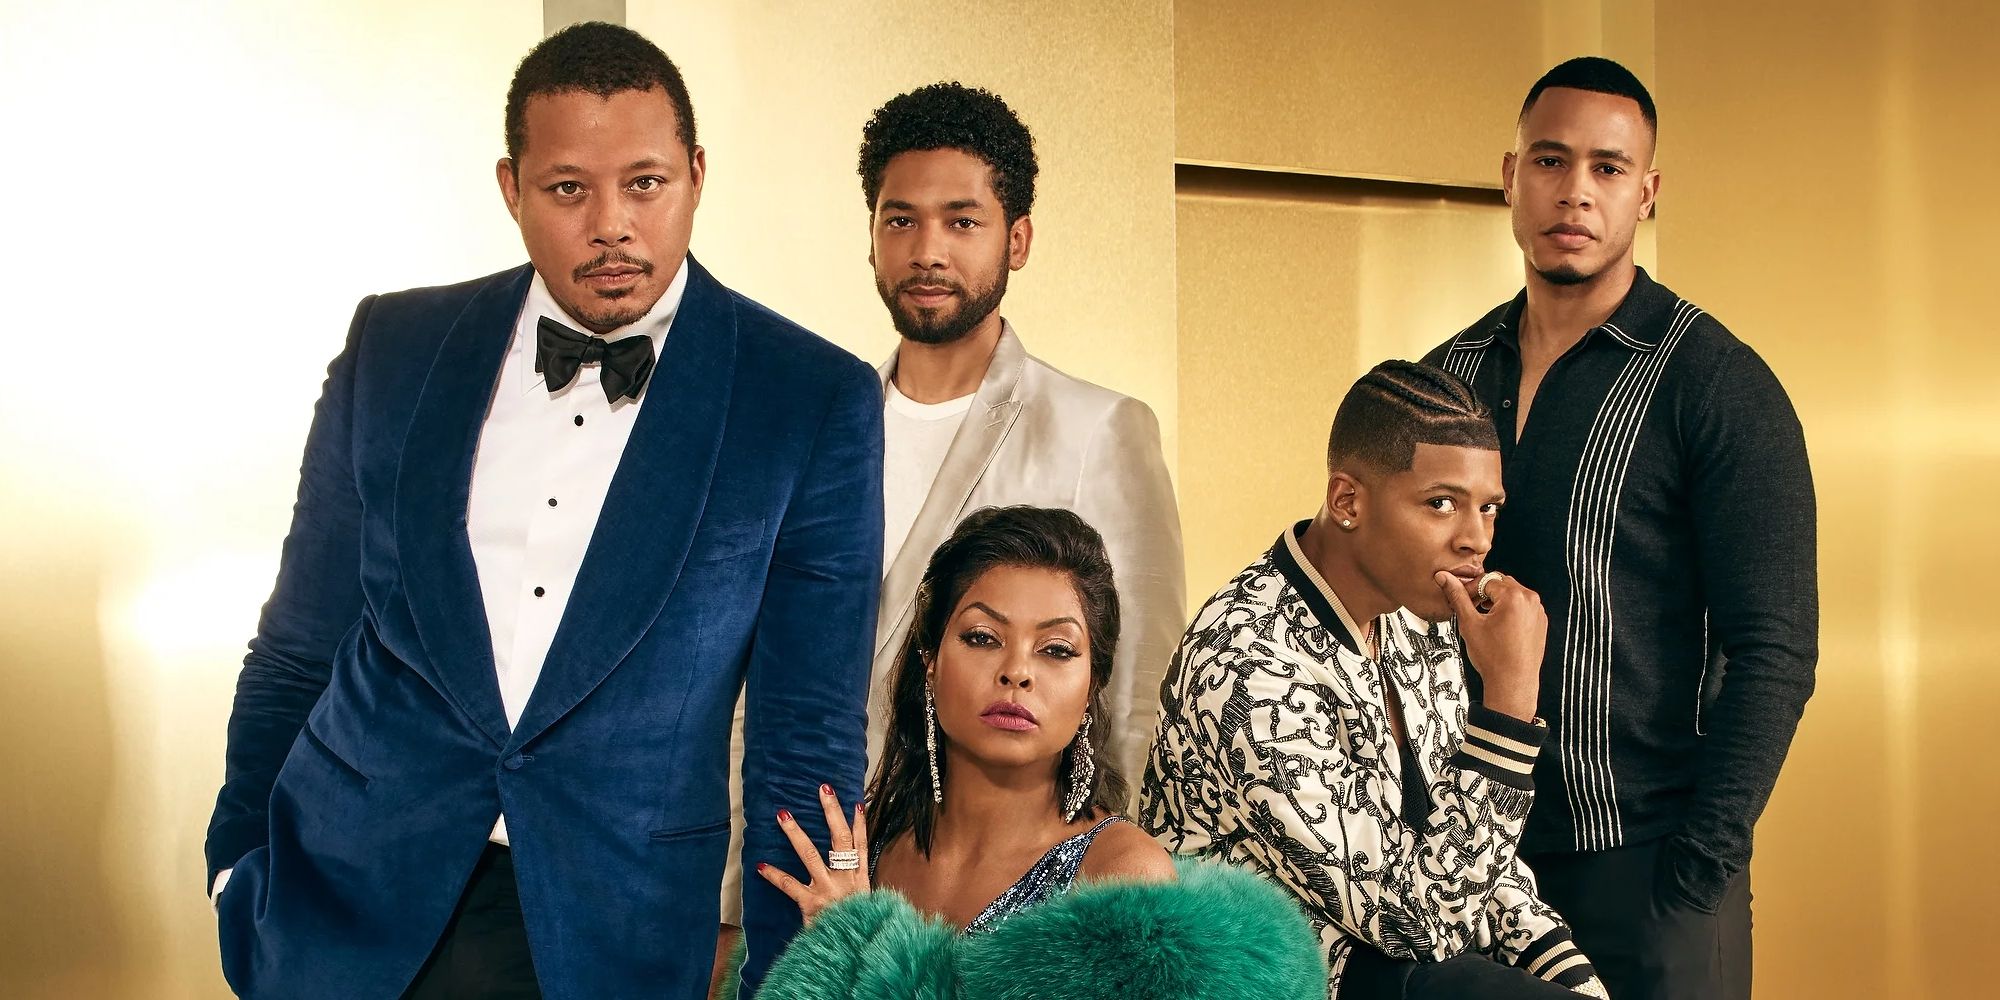 The main cast of Empire posing for a promo image.